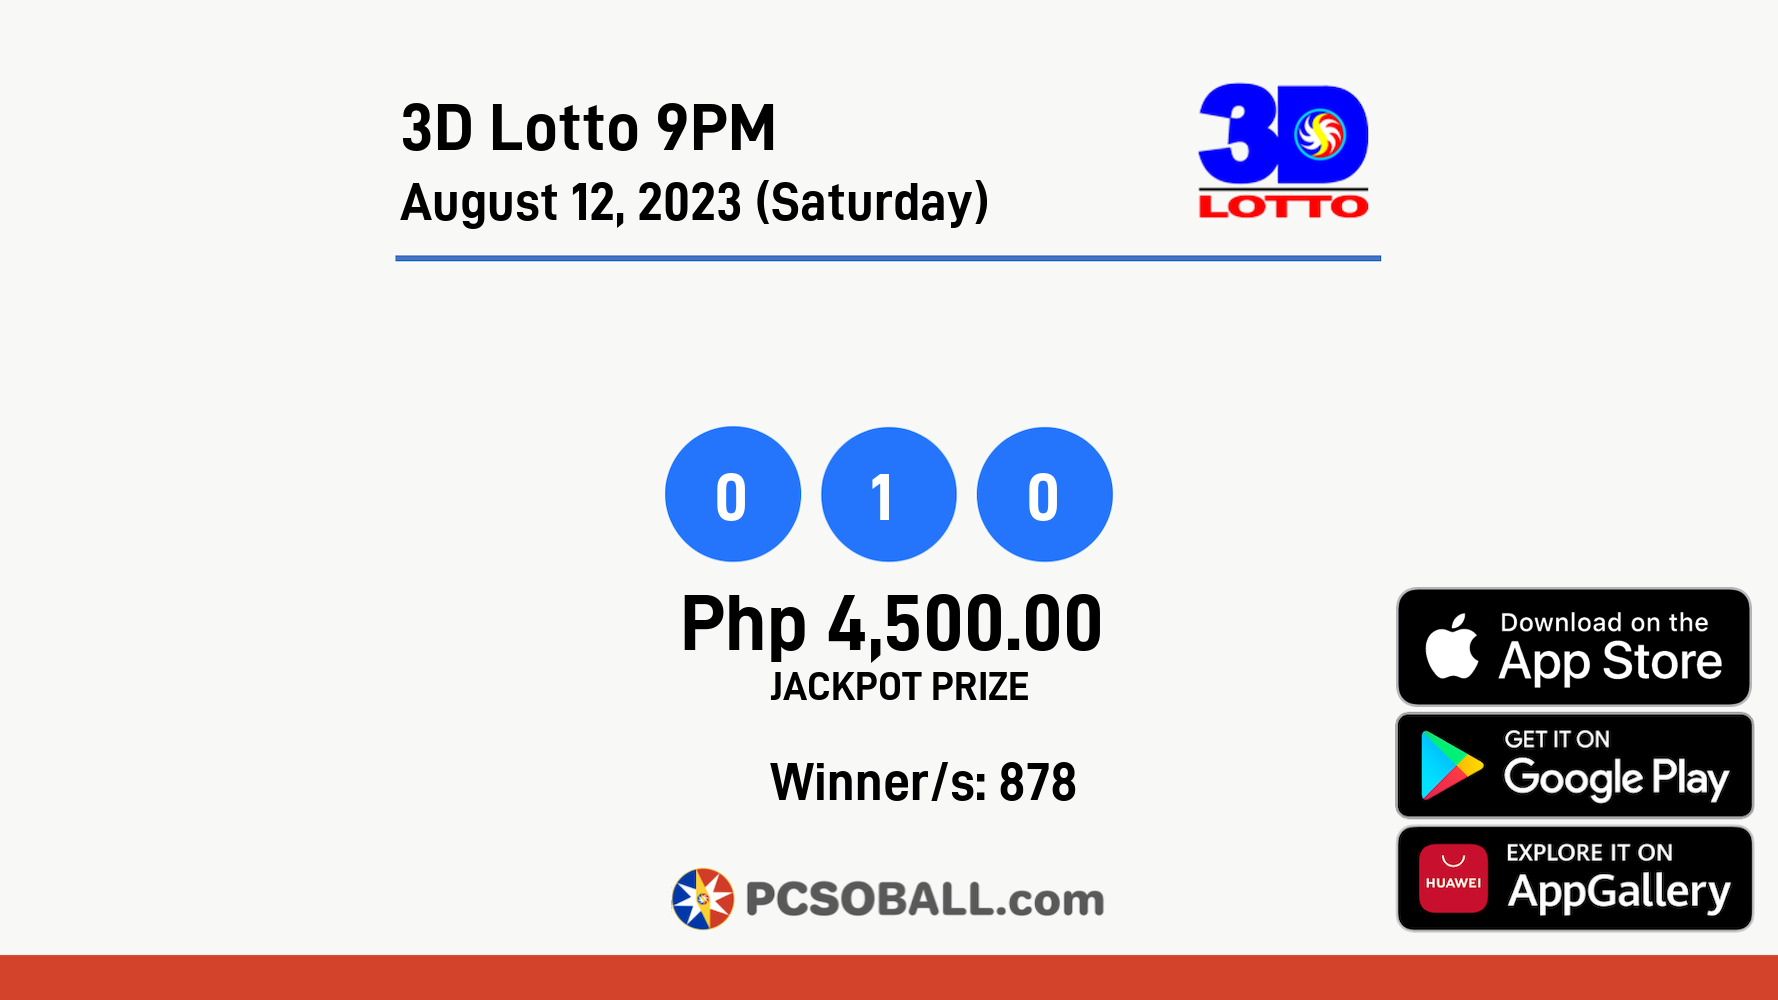 3D Lotto 9PM August 12, 2023 (Saturday) Result